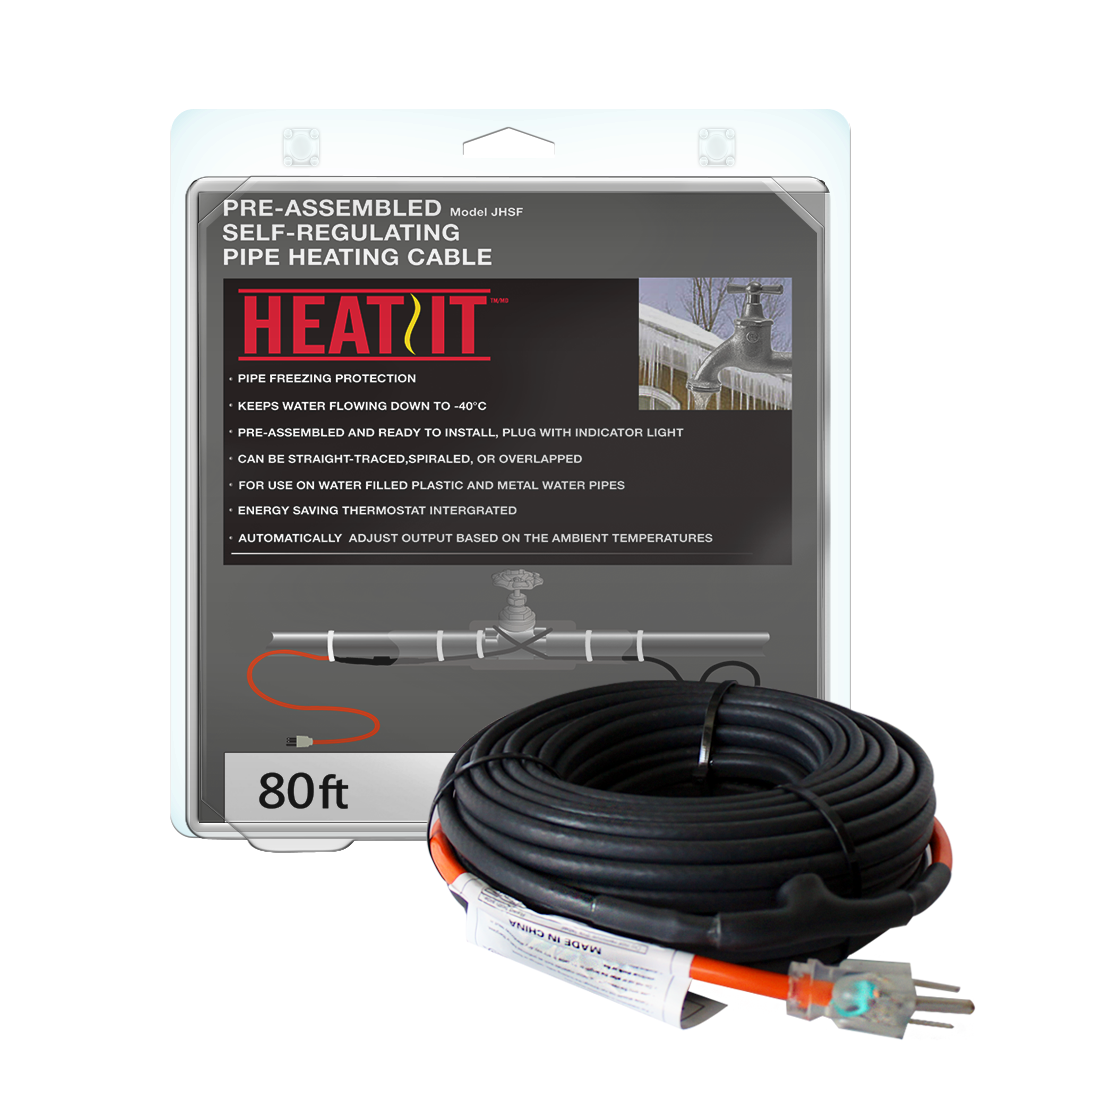 HEATIT Self-Regulating Water Pipe Heat Tape for Freeze Protection -  Built-in Thermostat Heavy-Duty, 120V, 100Ft - Ideal for Meta